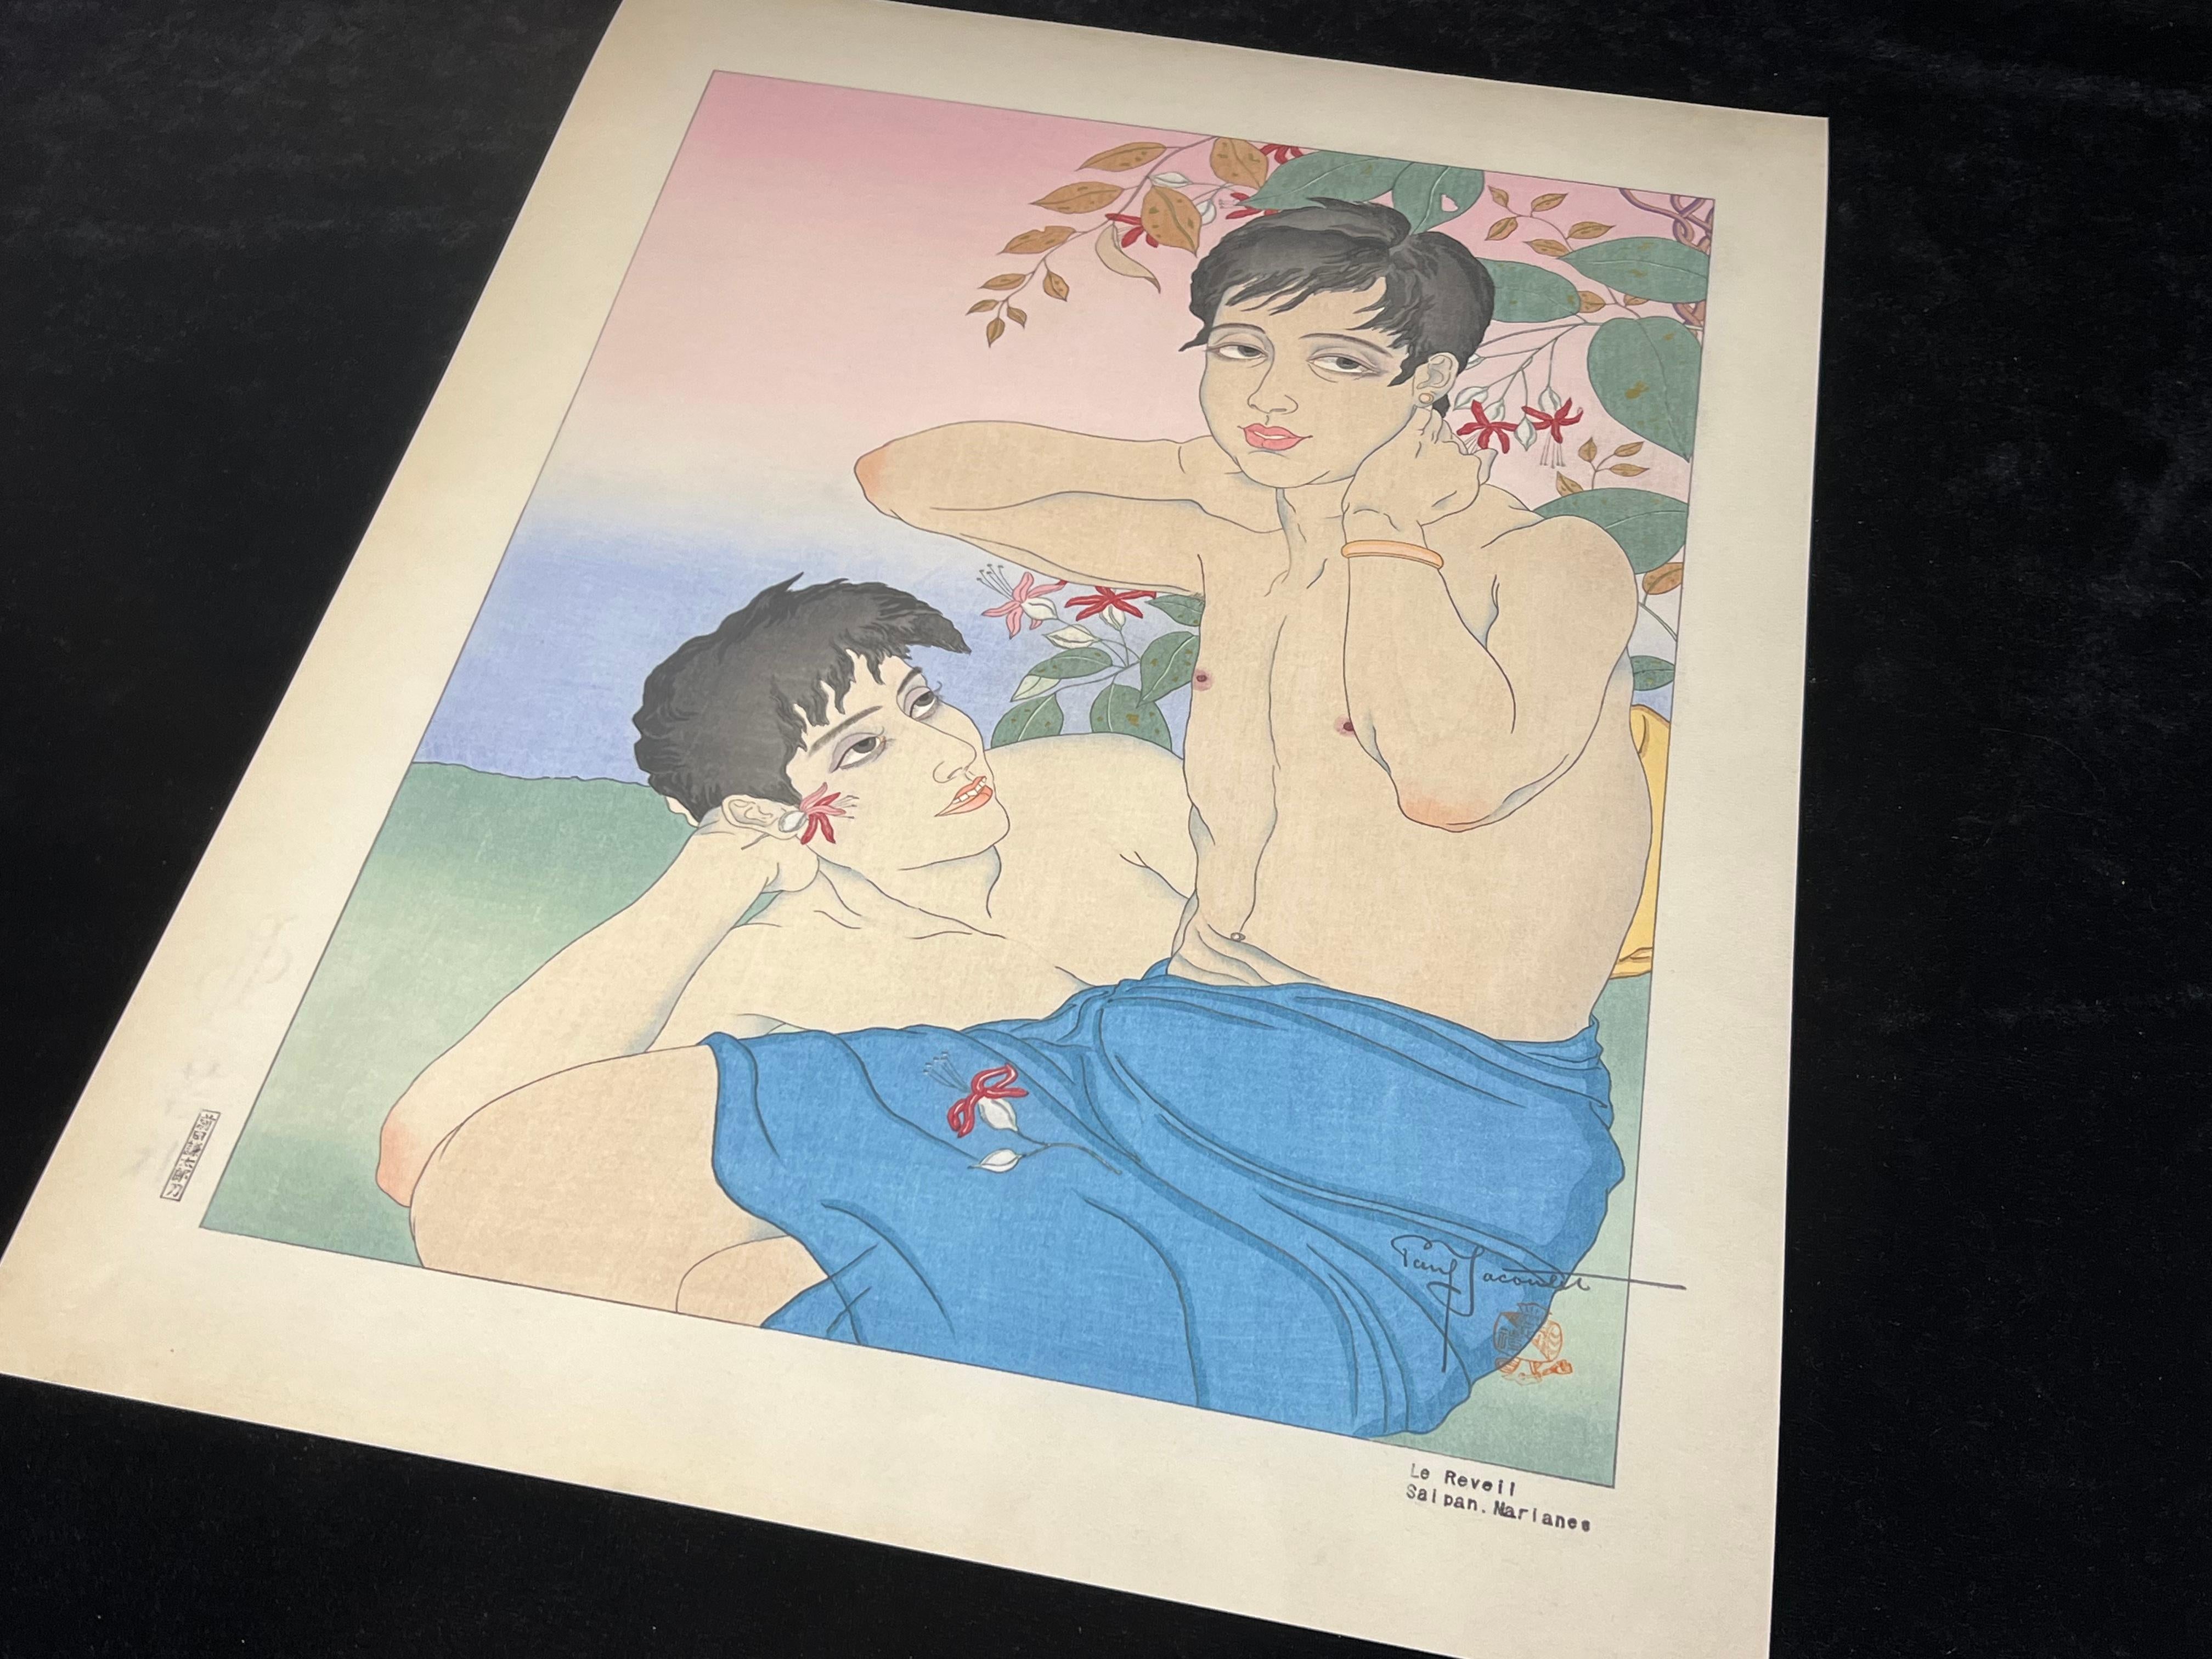 This is an original 1937 Paul Jacoulet print titled 